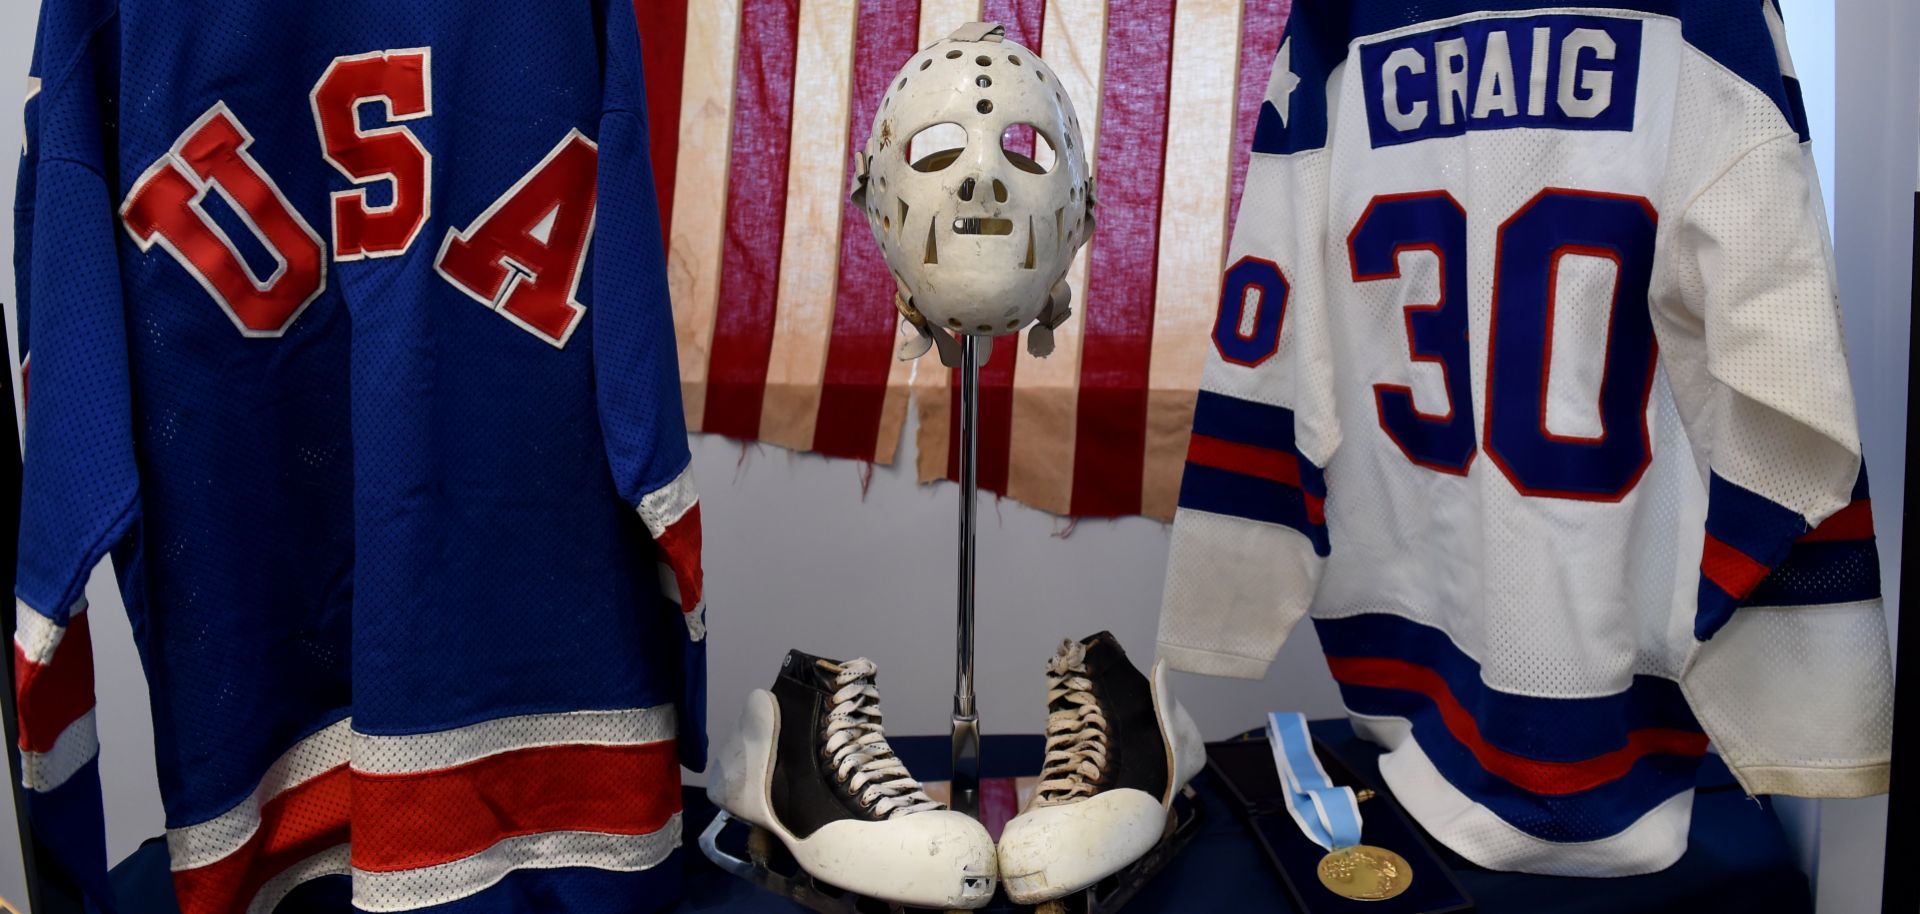 Items from the 1980 U.S. Winter Olympic Games in which the United States defeated the Soviet Union and won the gold medal, called the Miracle on Ice.